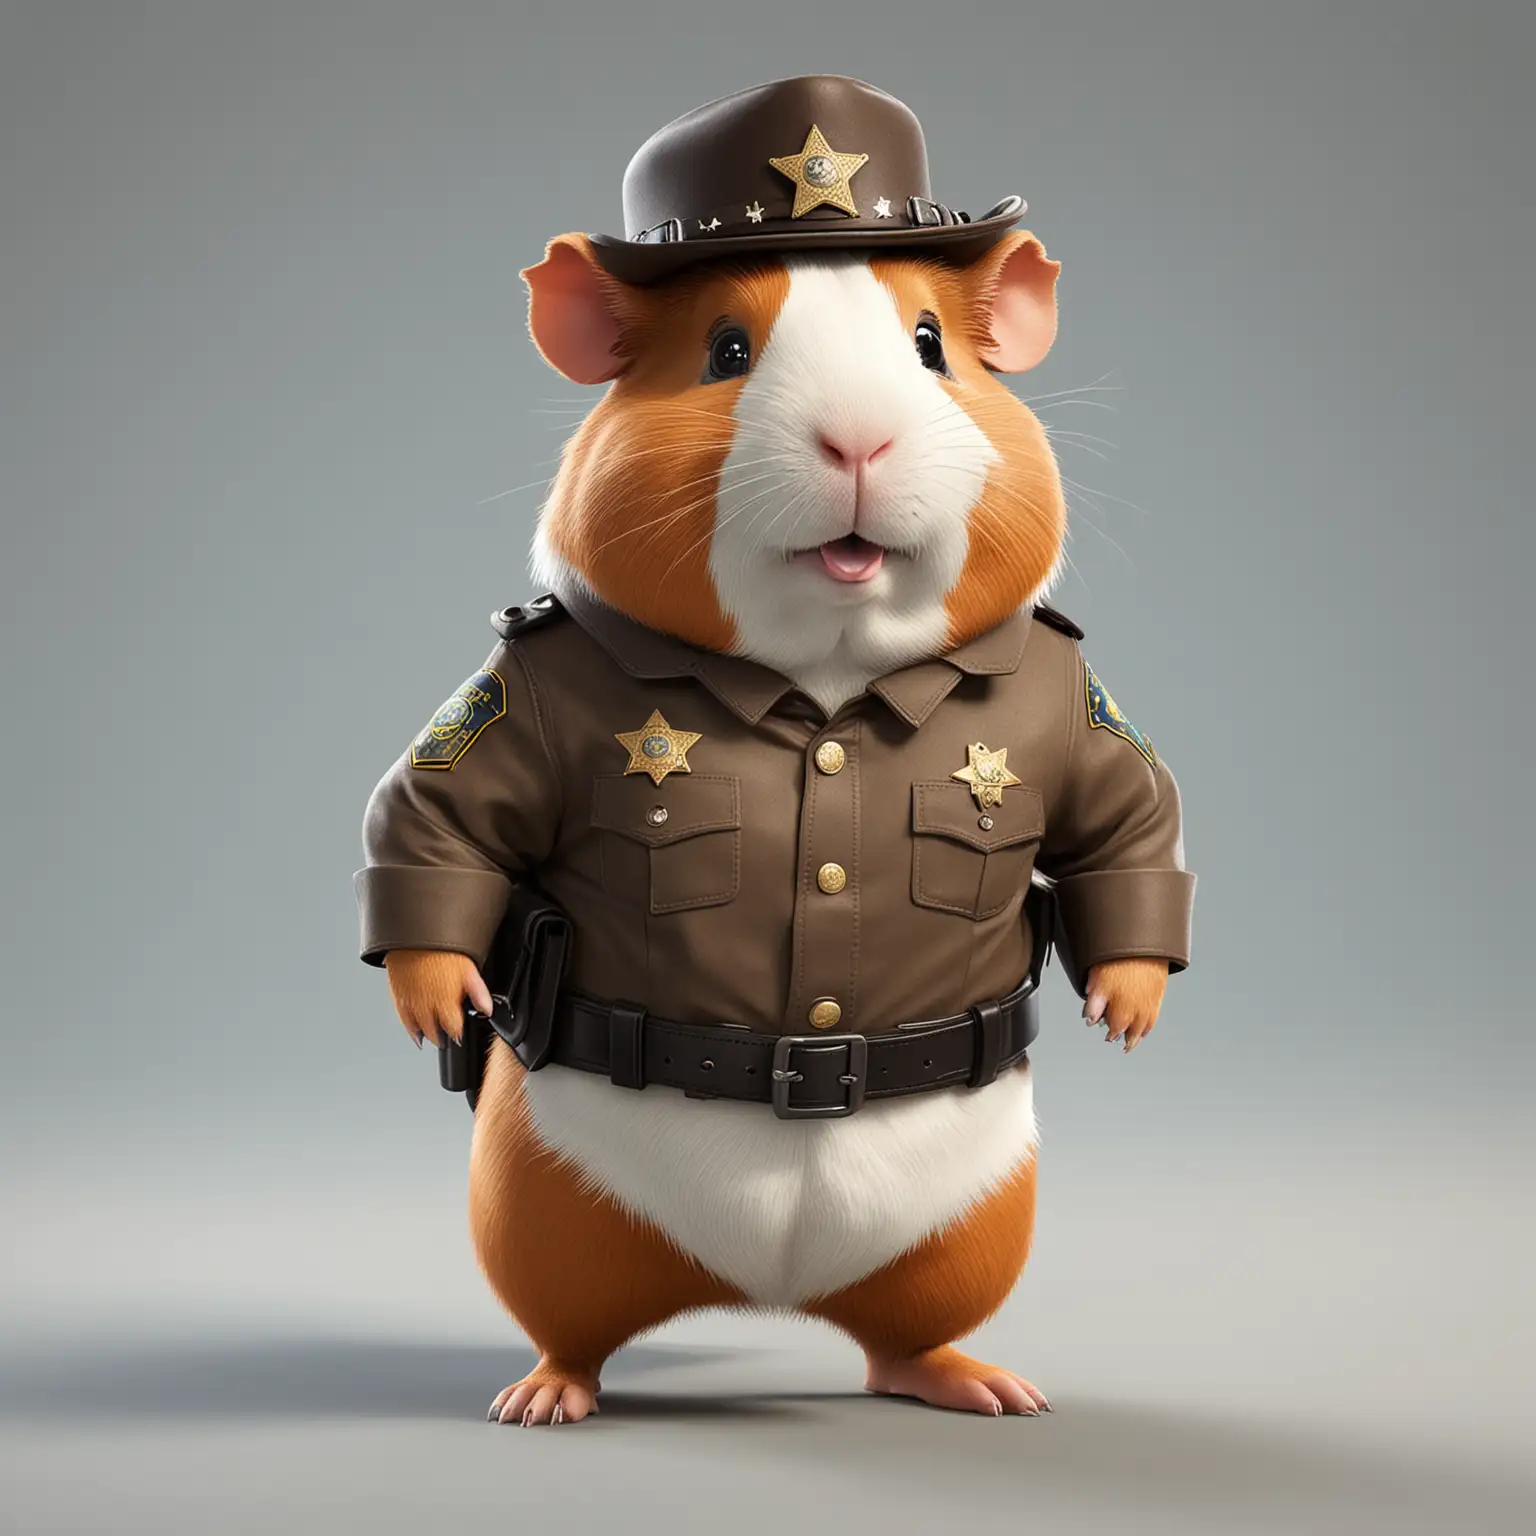 Cartoon Sheriff Guinea Pig Playful Rodent in Sheriff Costume